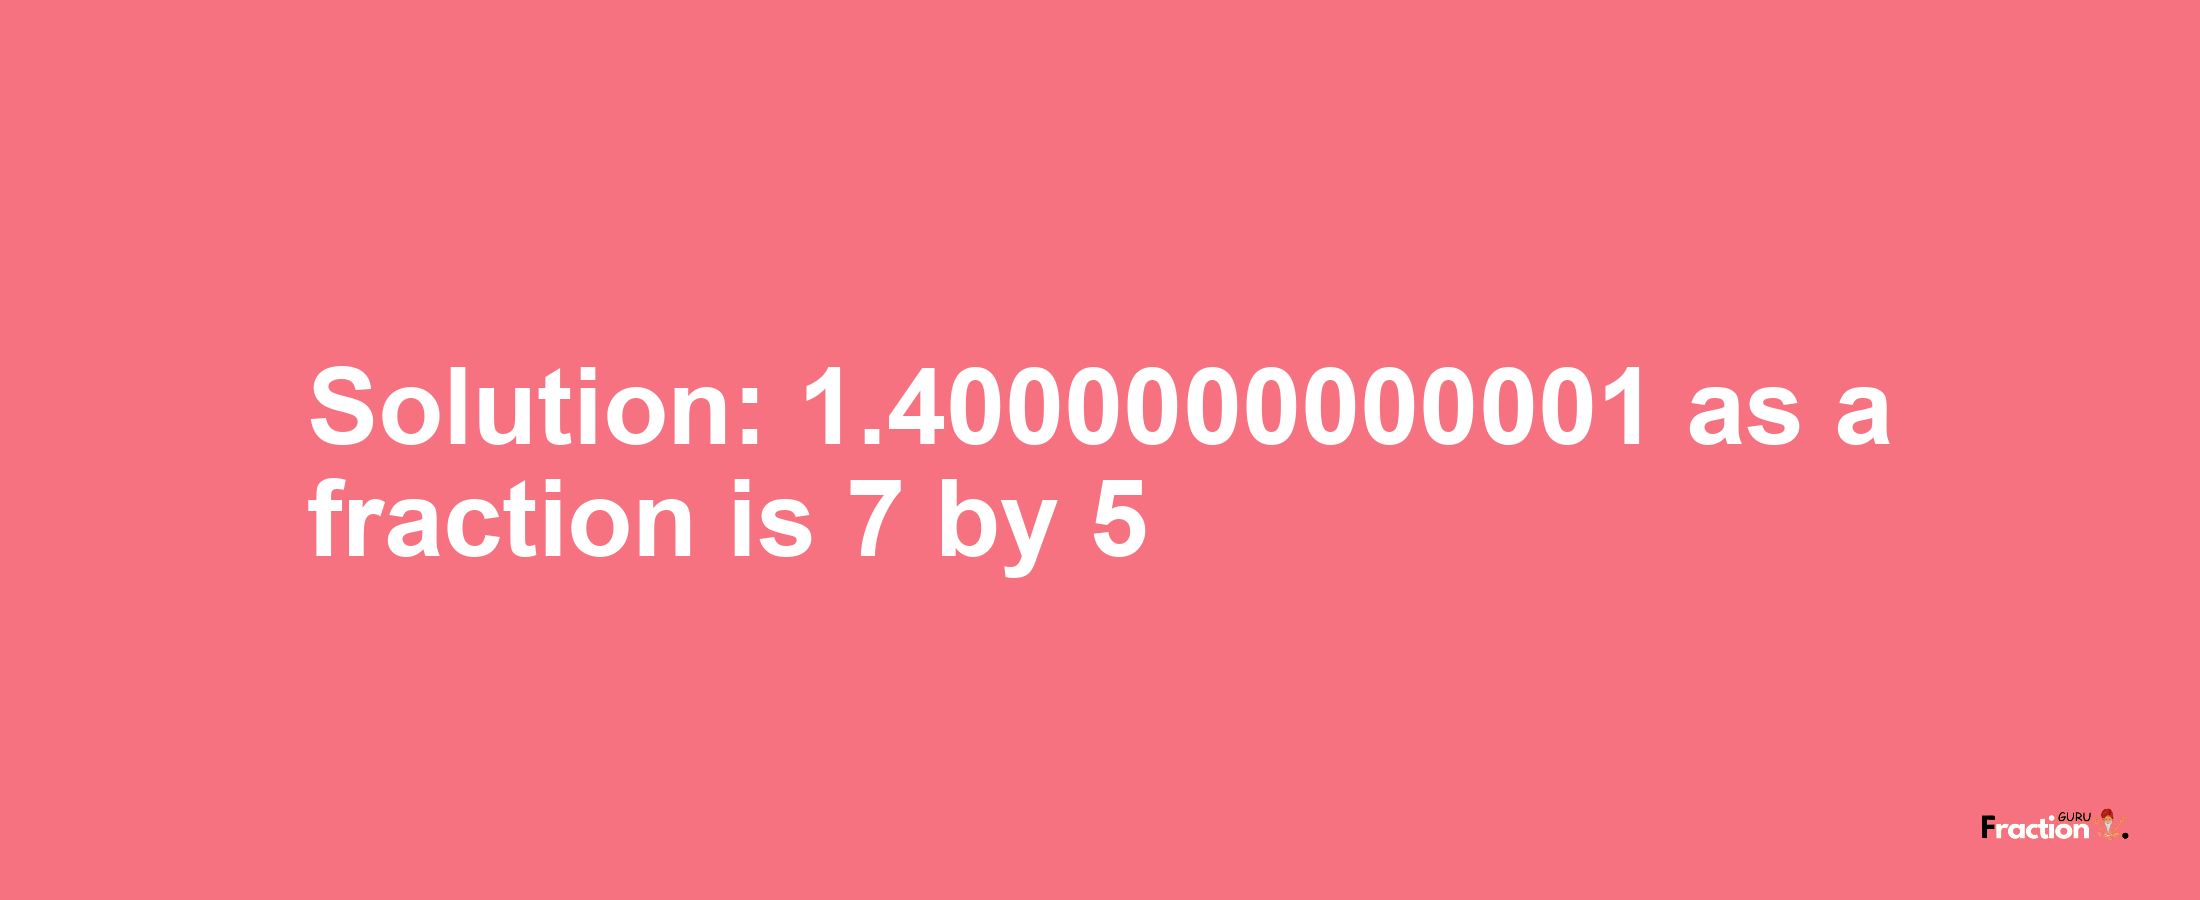 Solution:1.4000000000001 as a fraction is 7/5